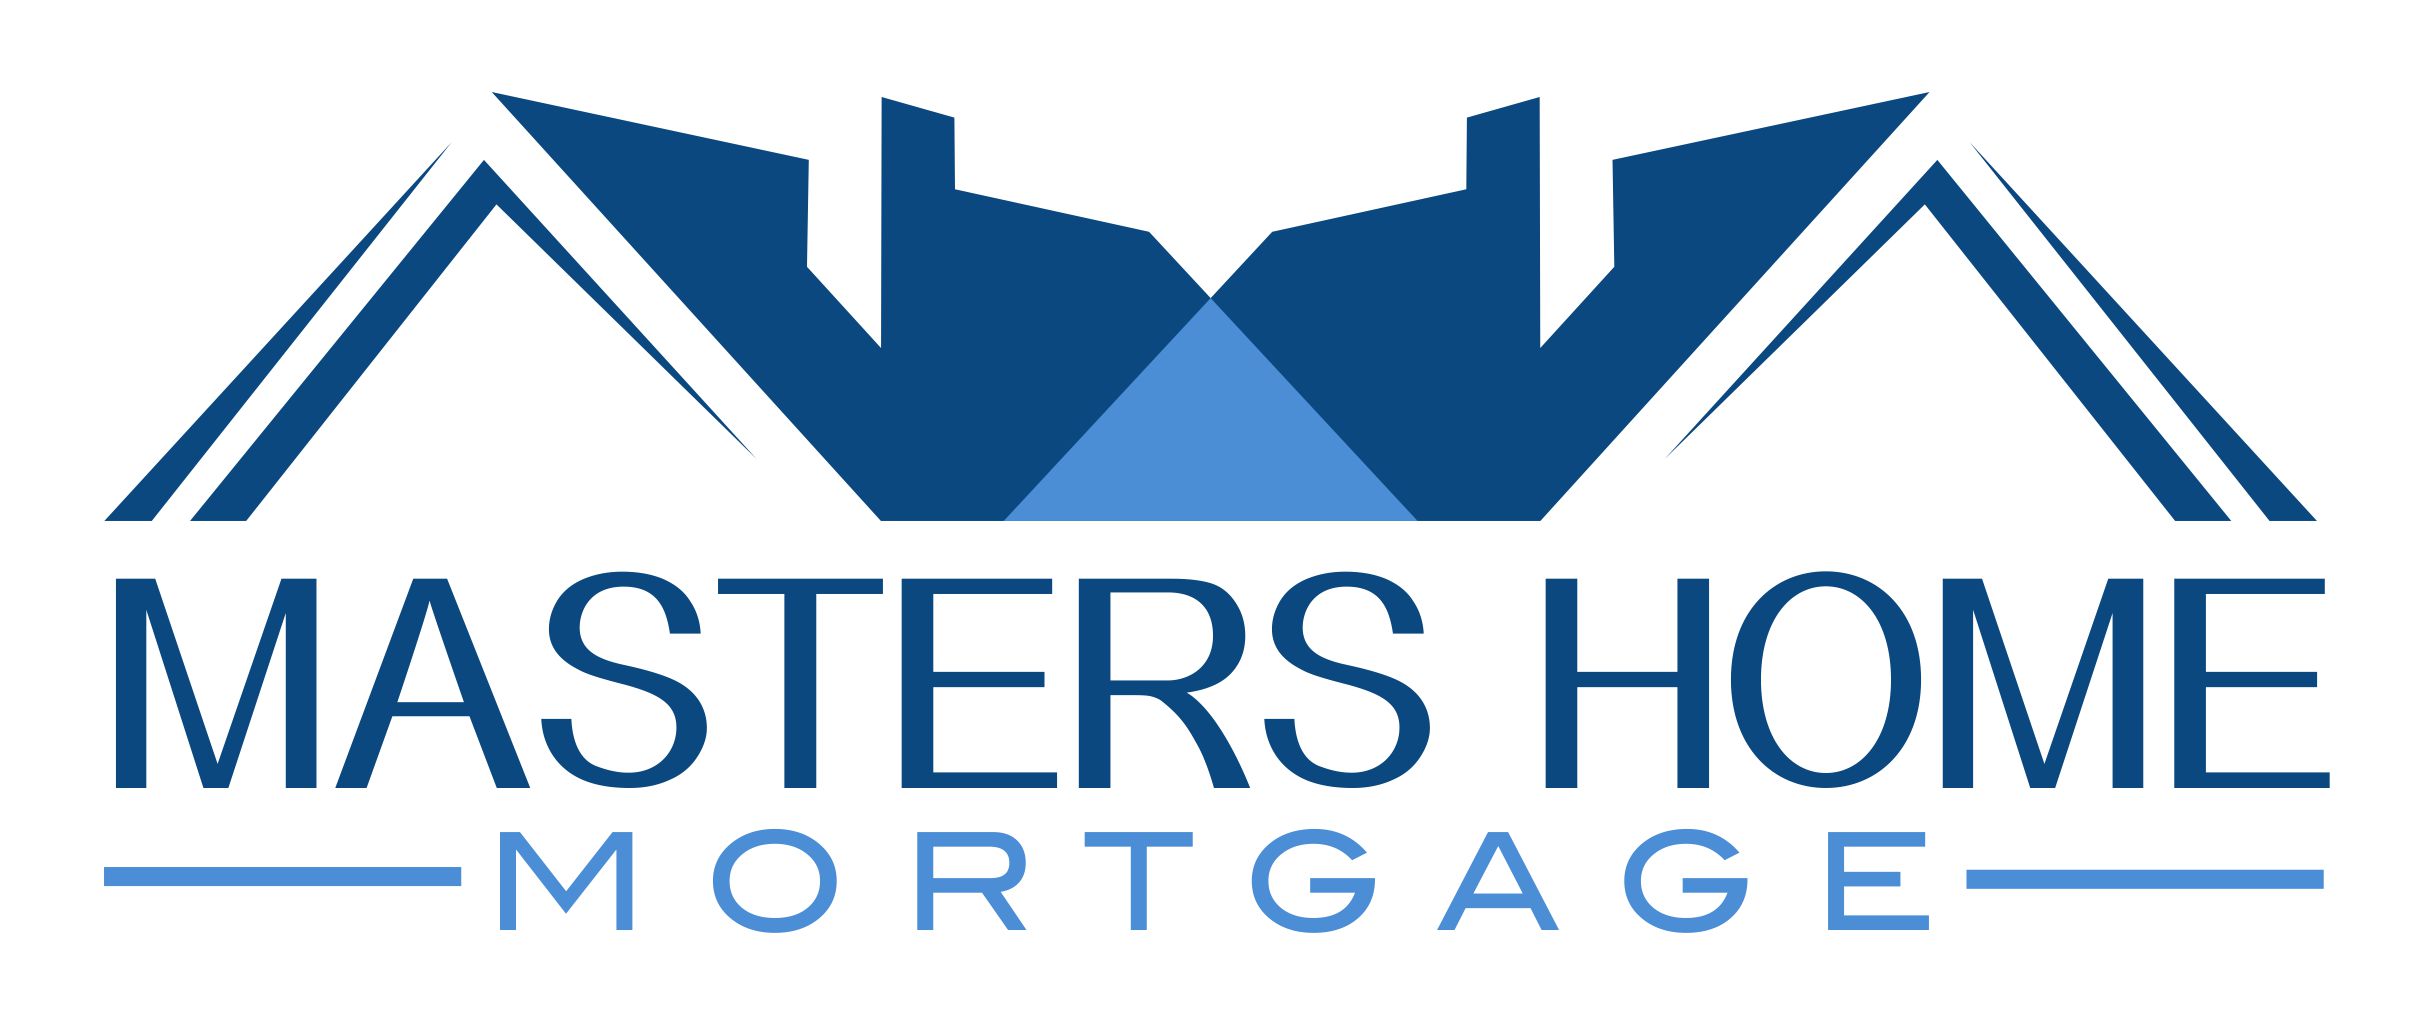 Masters Home Mortgage